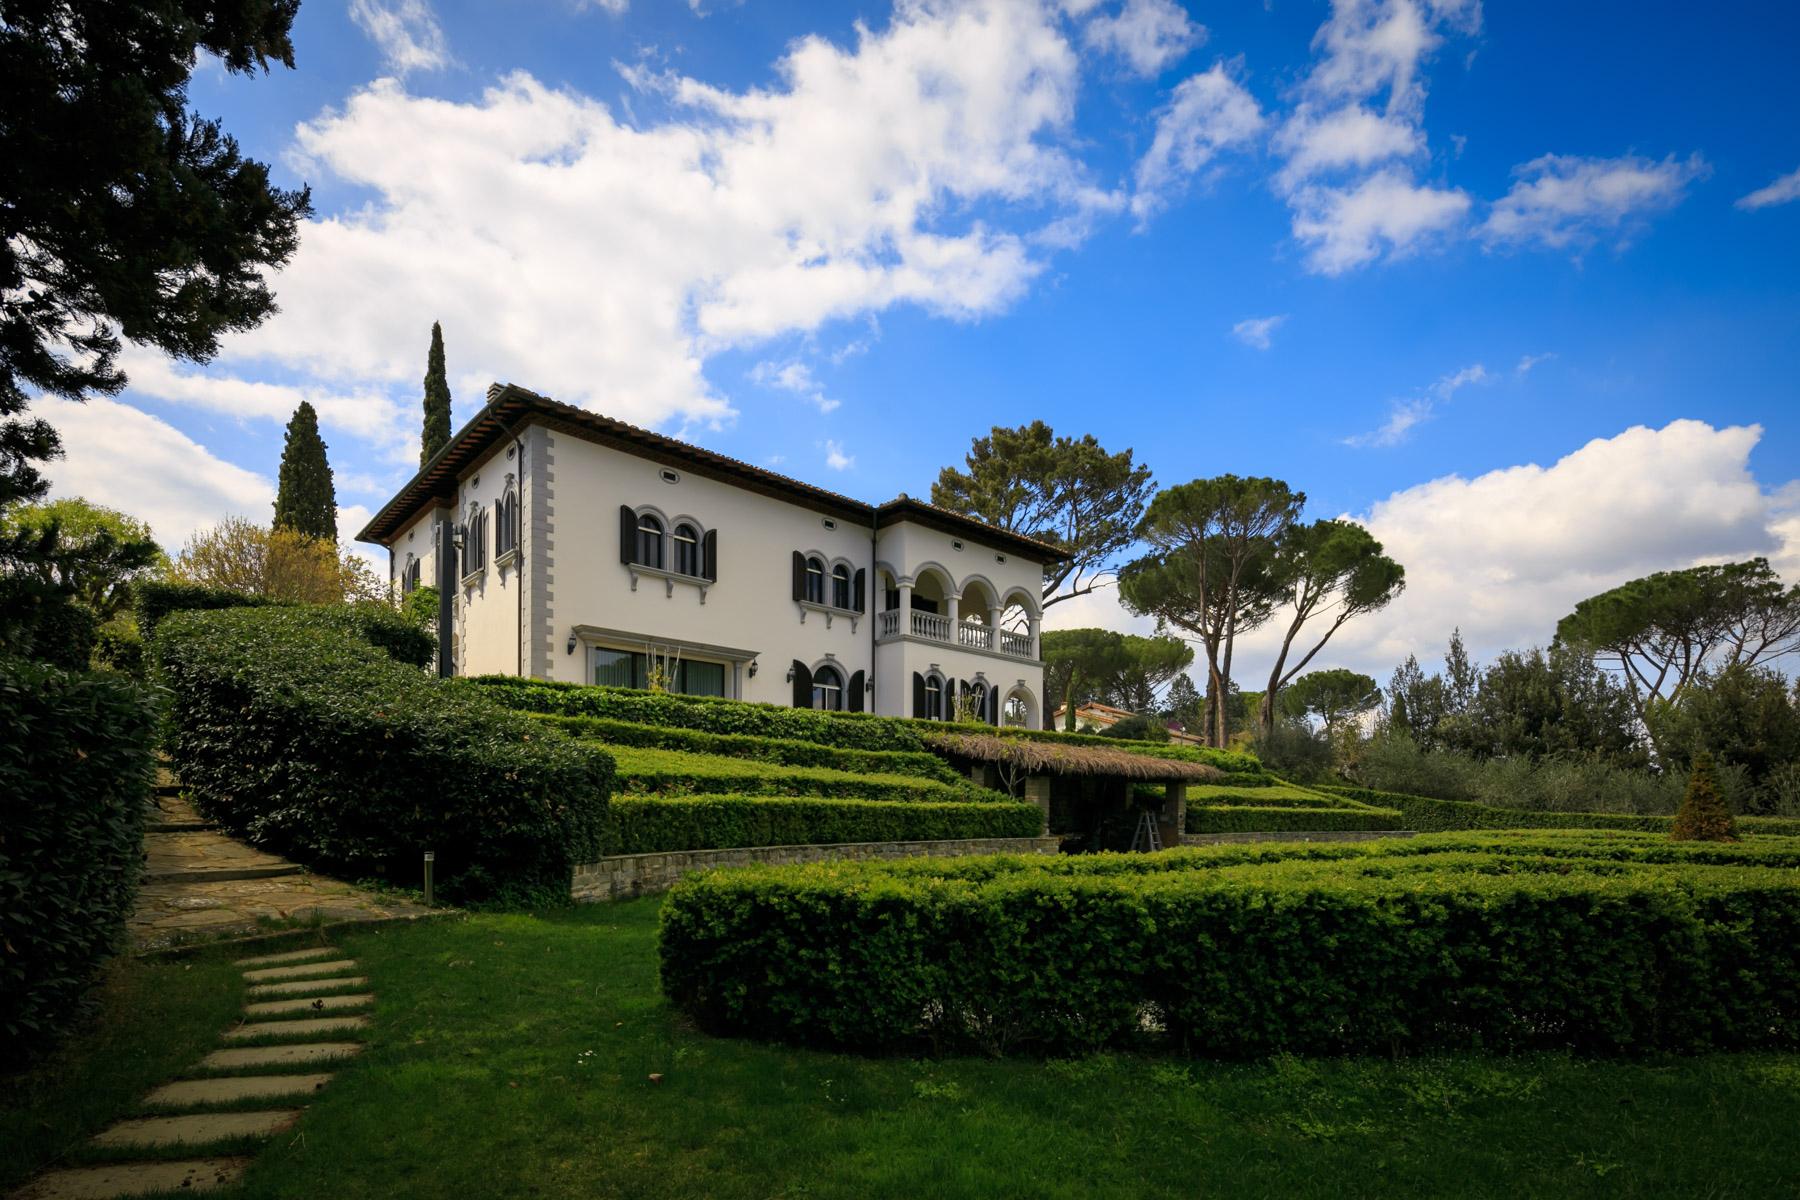 Splendid villa with pool on the Poggio Imperiale hill in Florence - 40